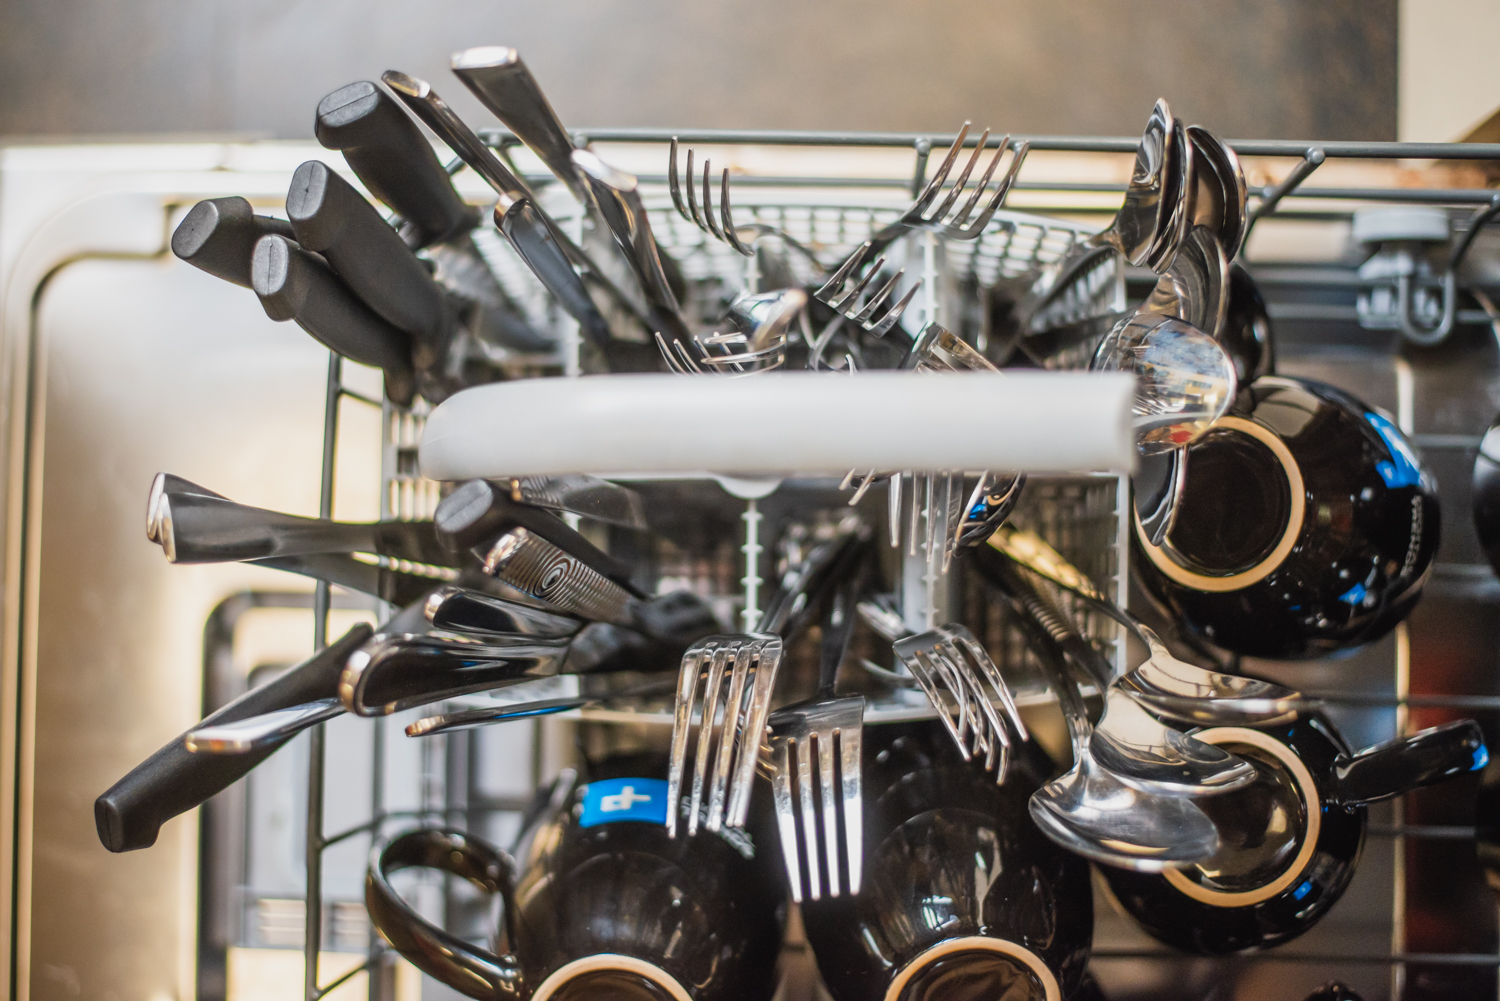 Should You Point Silverware Up or Down in the Dishwasher?